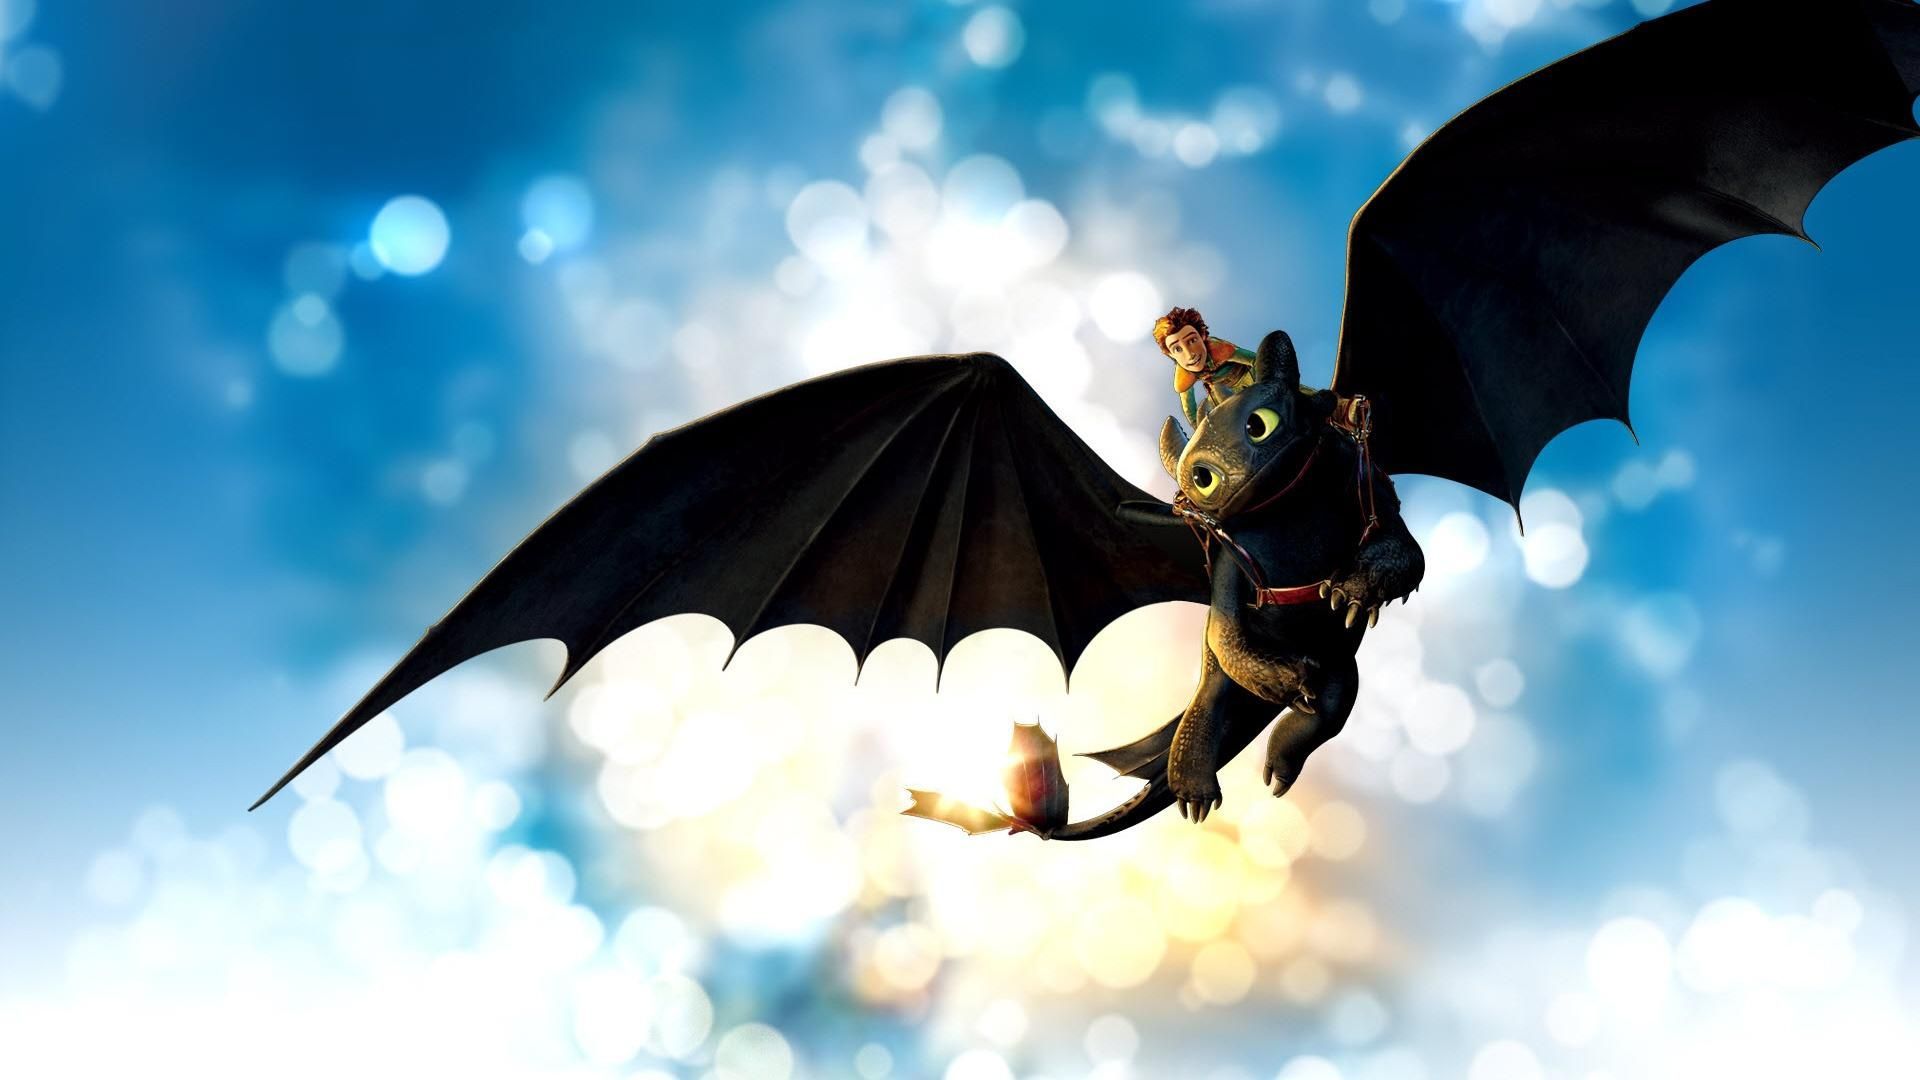 How To Train Your Dragon (1920x1080). How train your